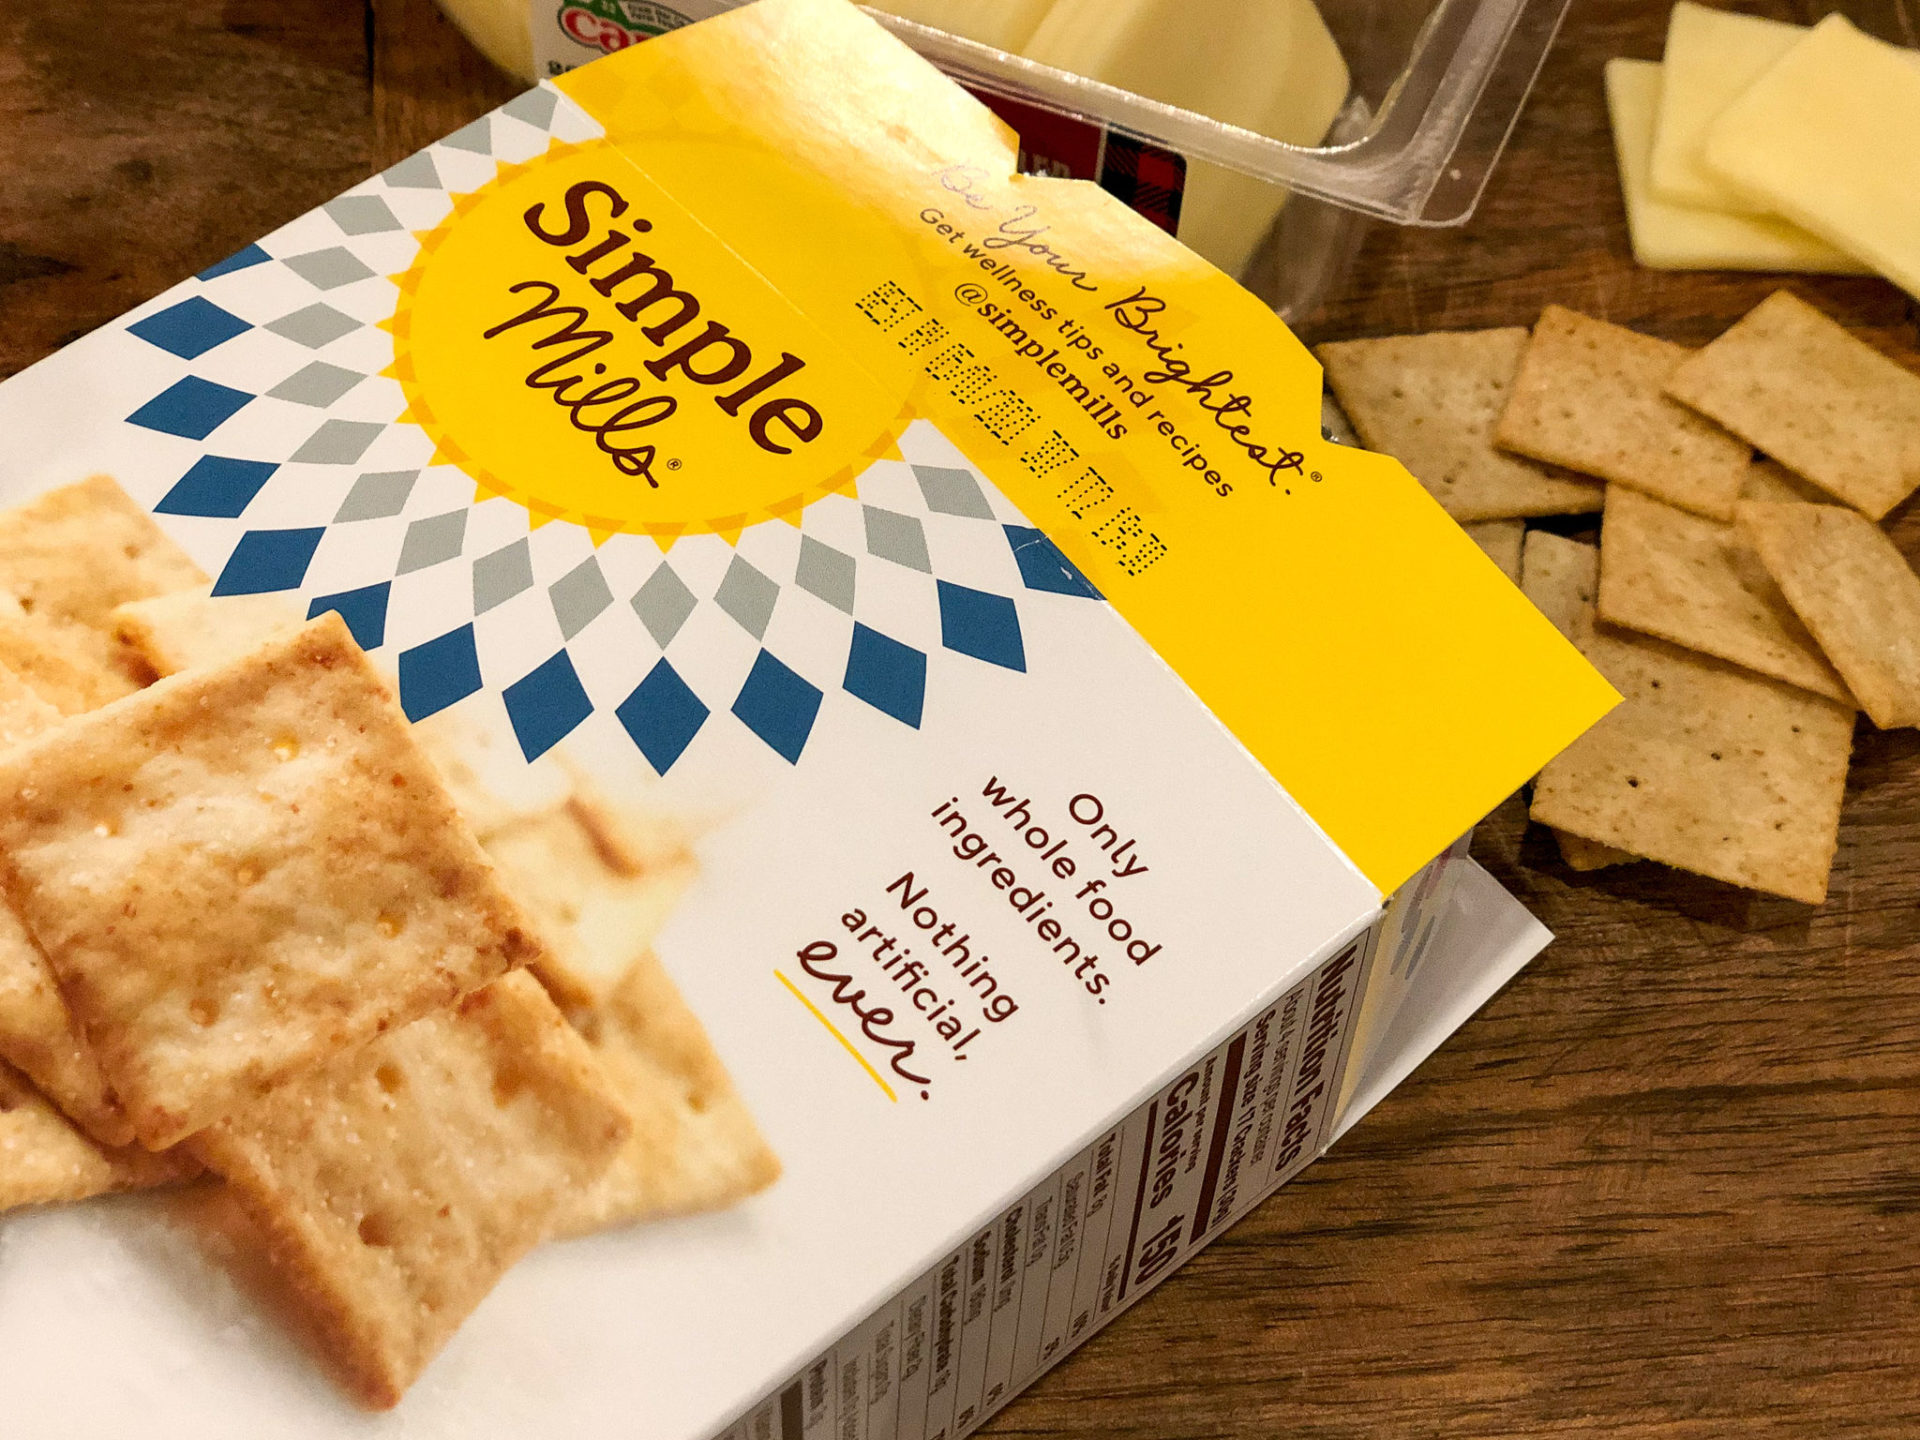 Get The Boxes Of Simple Mills Crackers For As Low As $3.99 At Kroger (Regular Price $6.49)